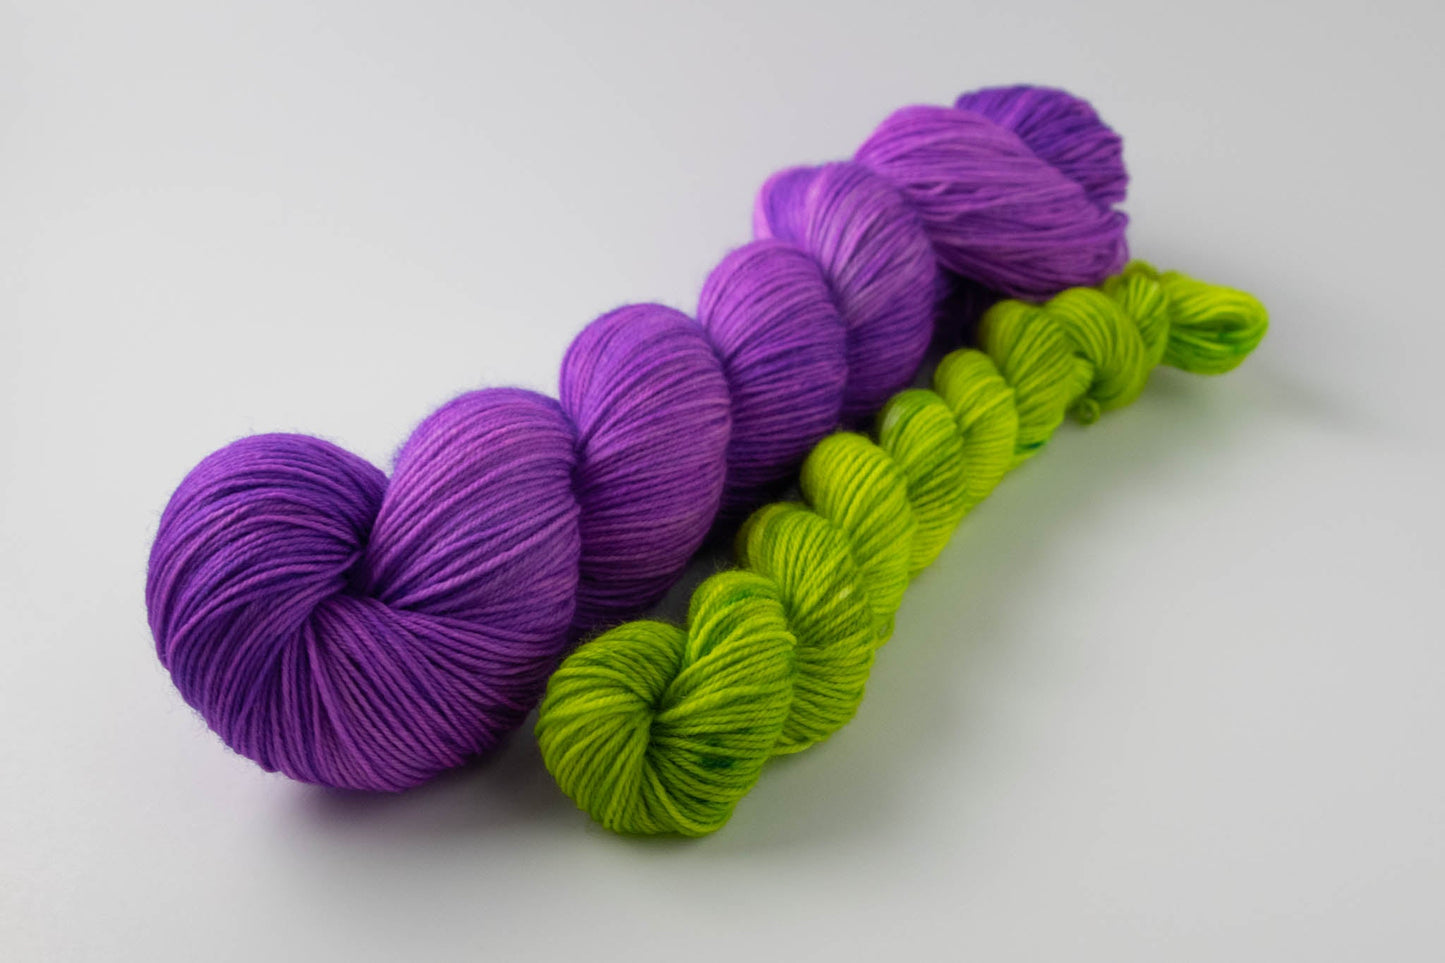 A skein of purple Merino wool and a mini skein of electric green on a white background.